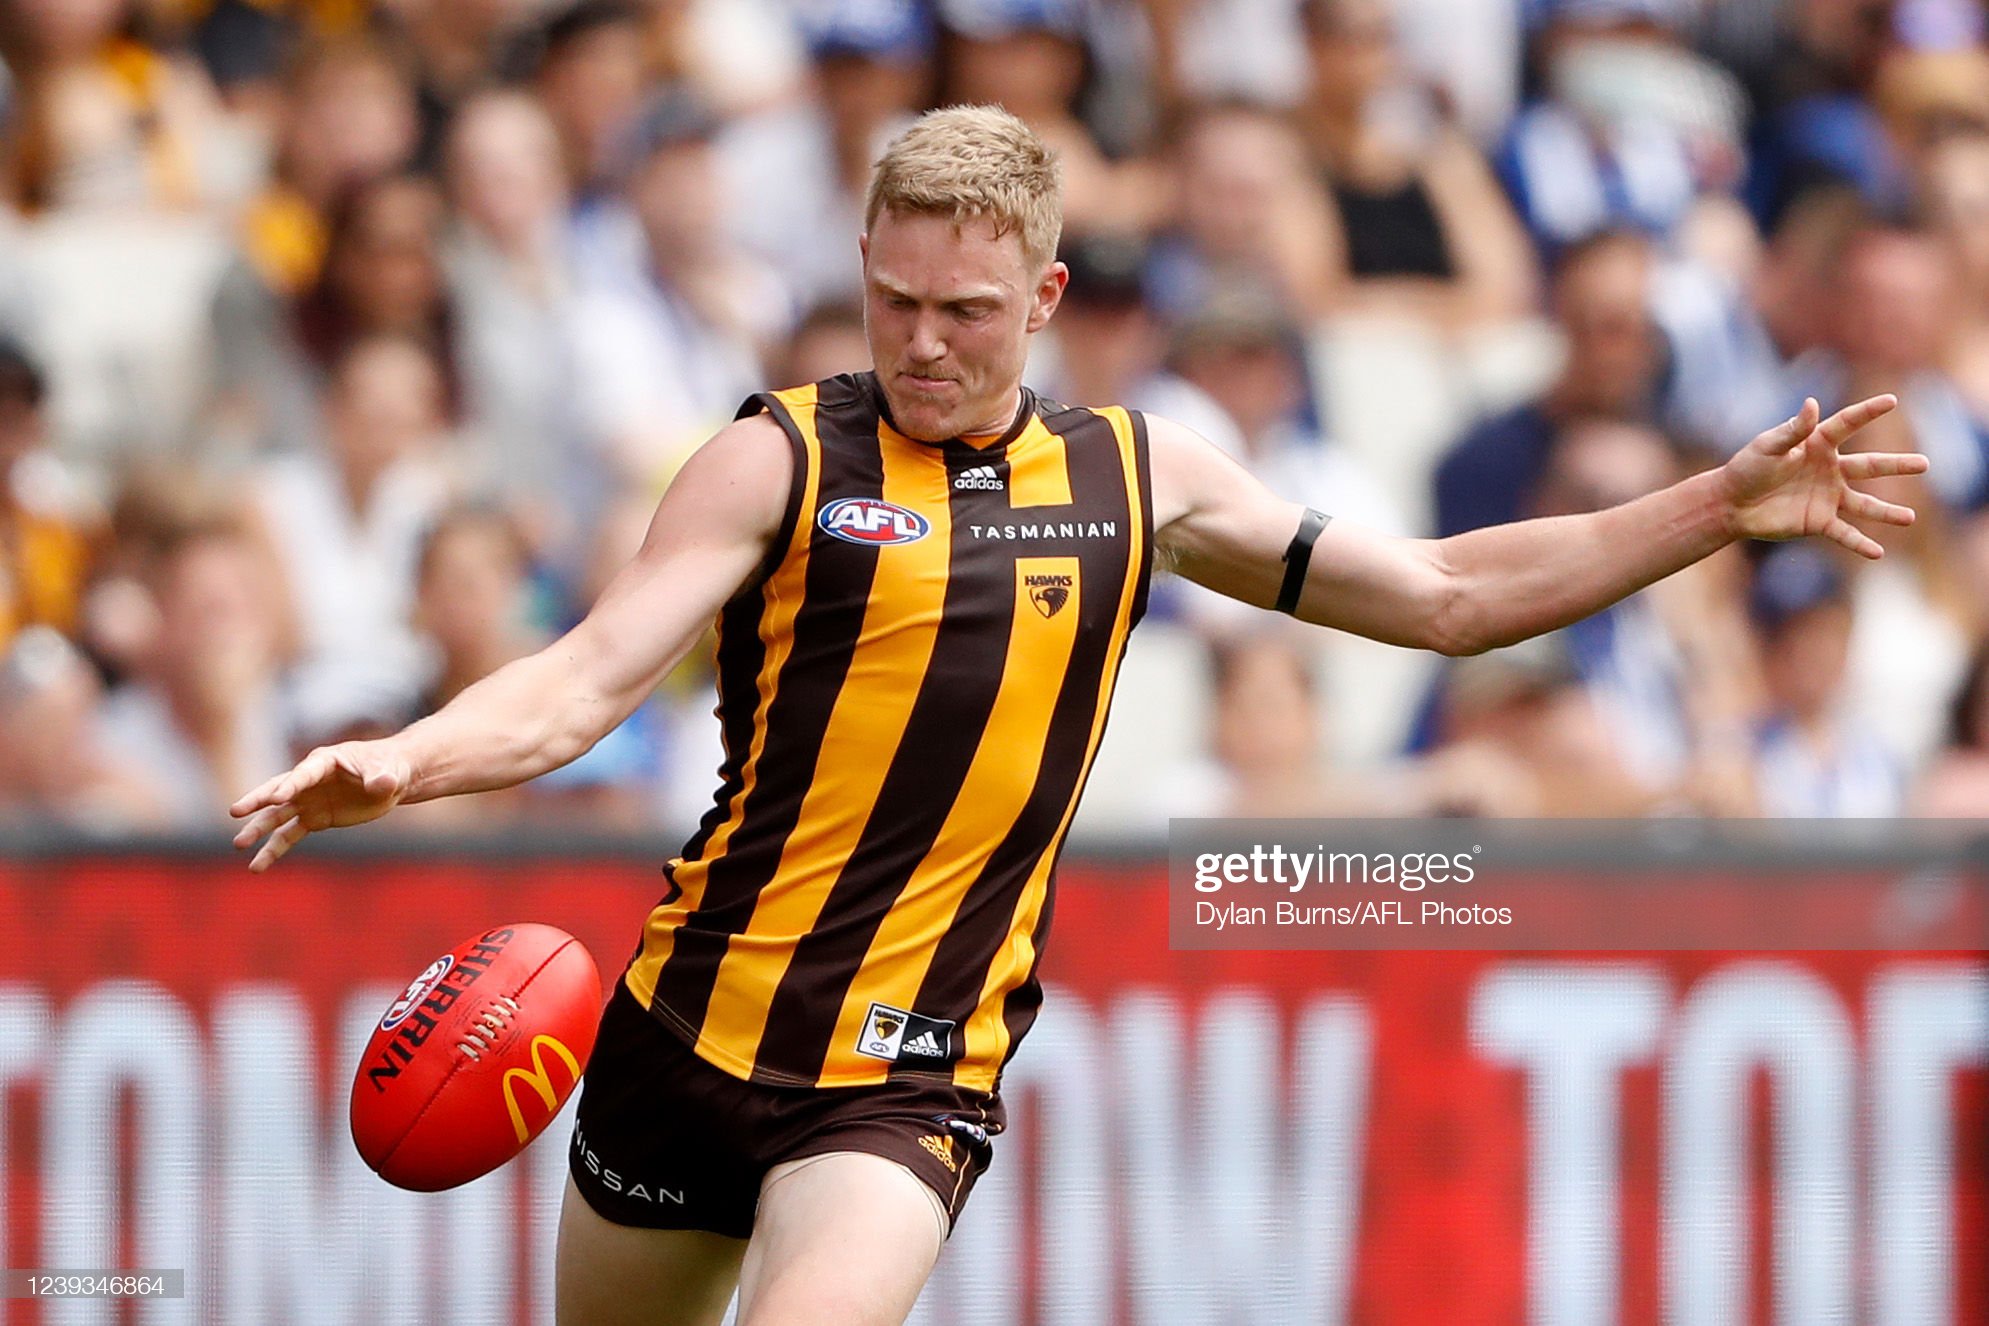 james-sicily-of-the-hawks-in-action-during-the-2022-afl-round-01-picture-id1239346864